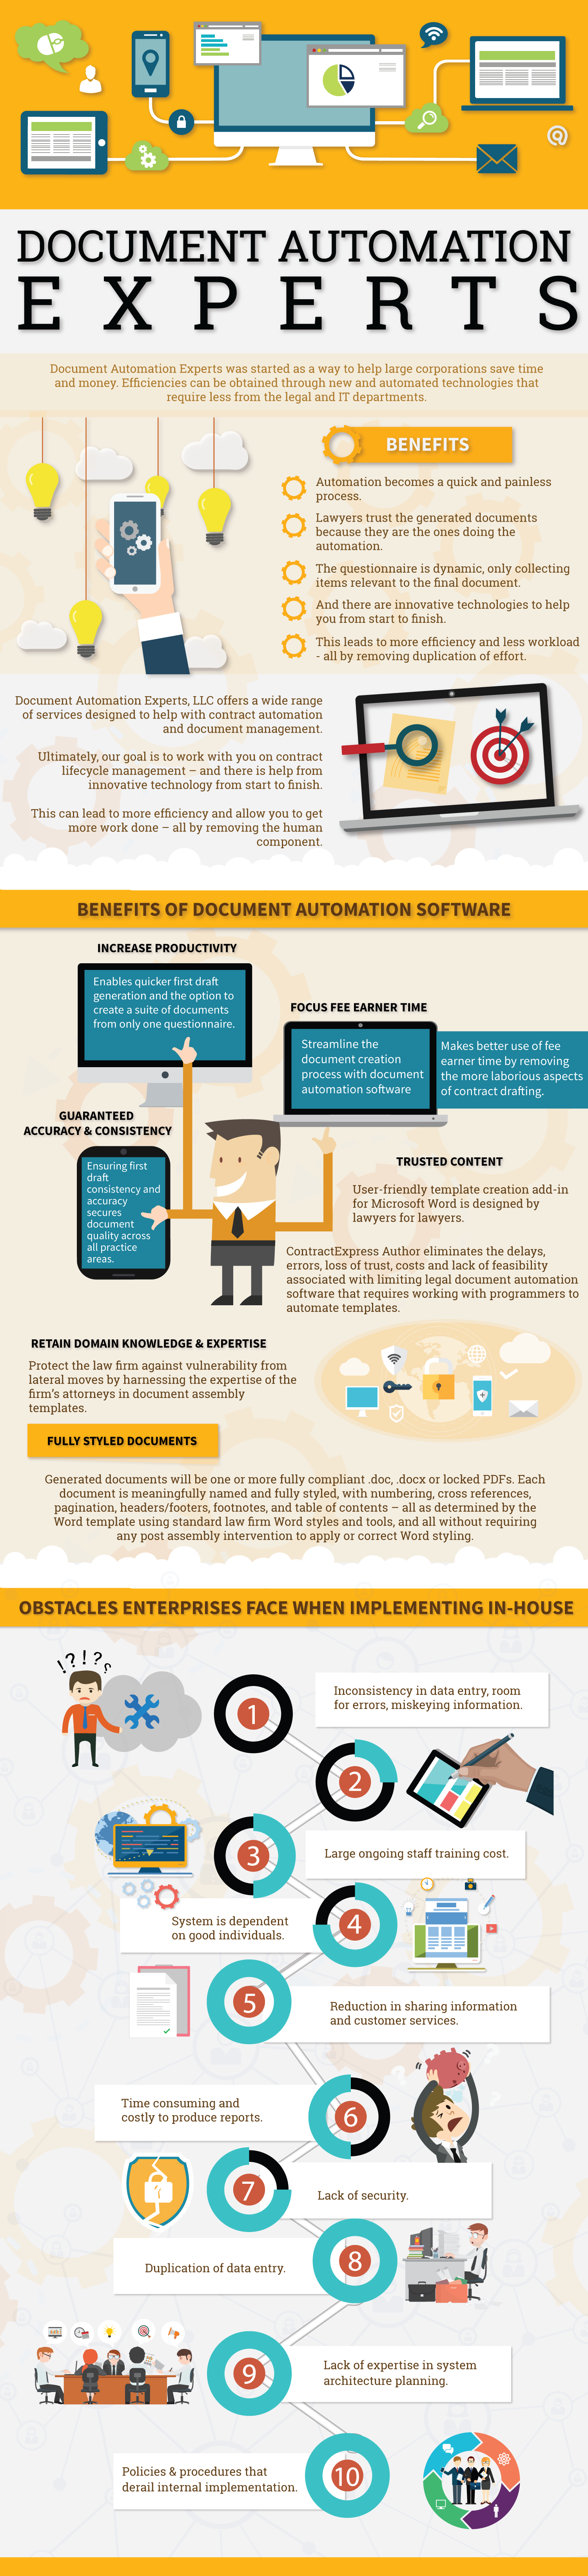 Document Automation Experts Infographic